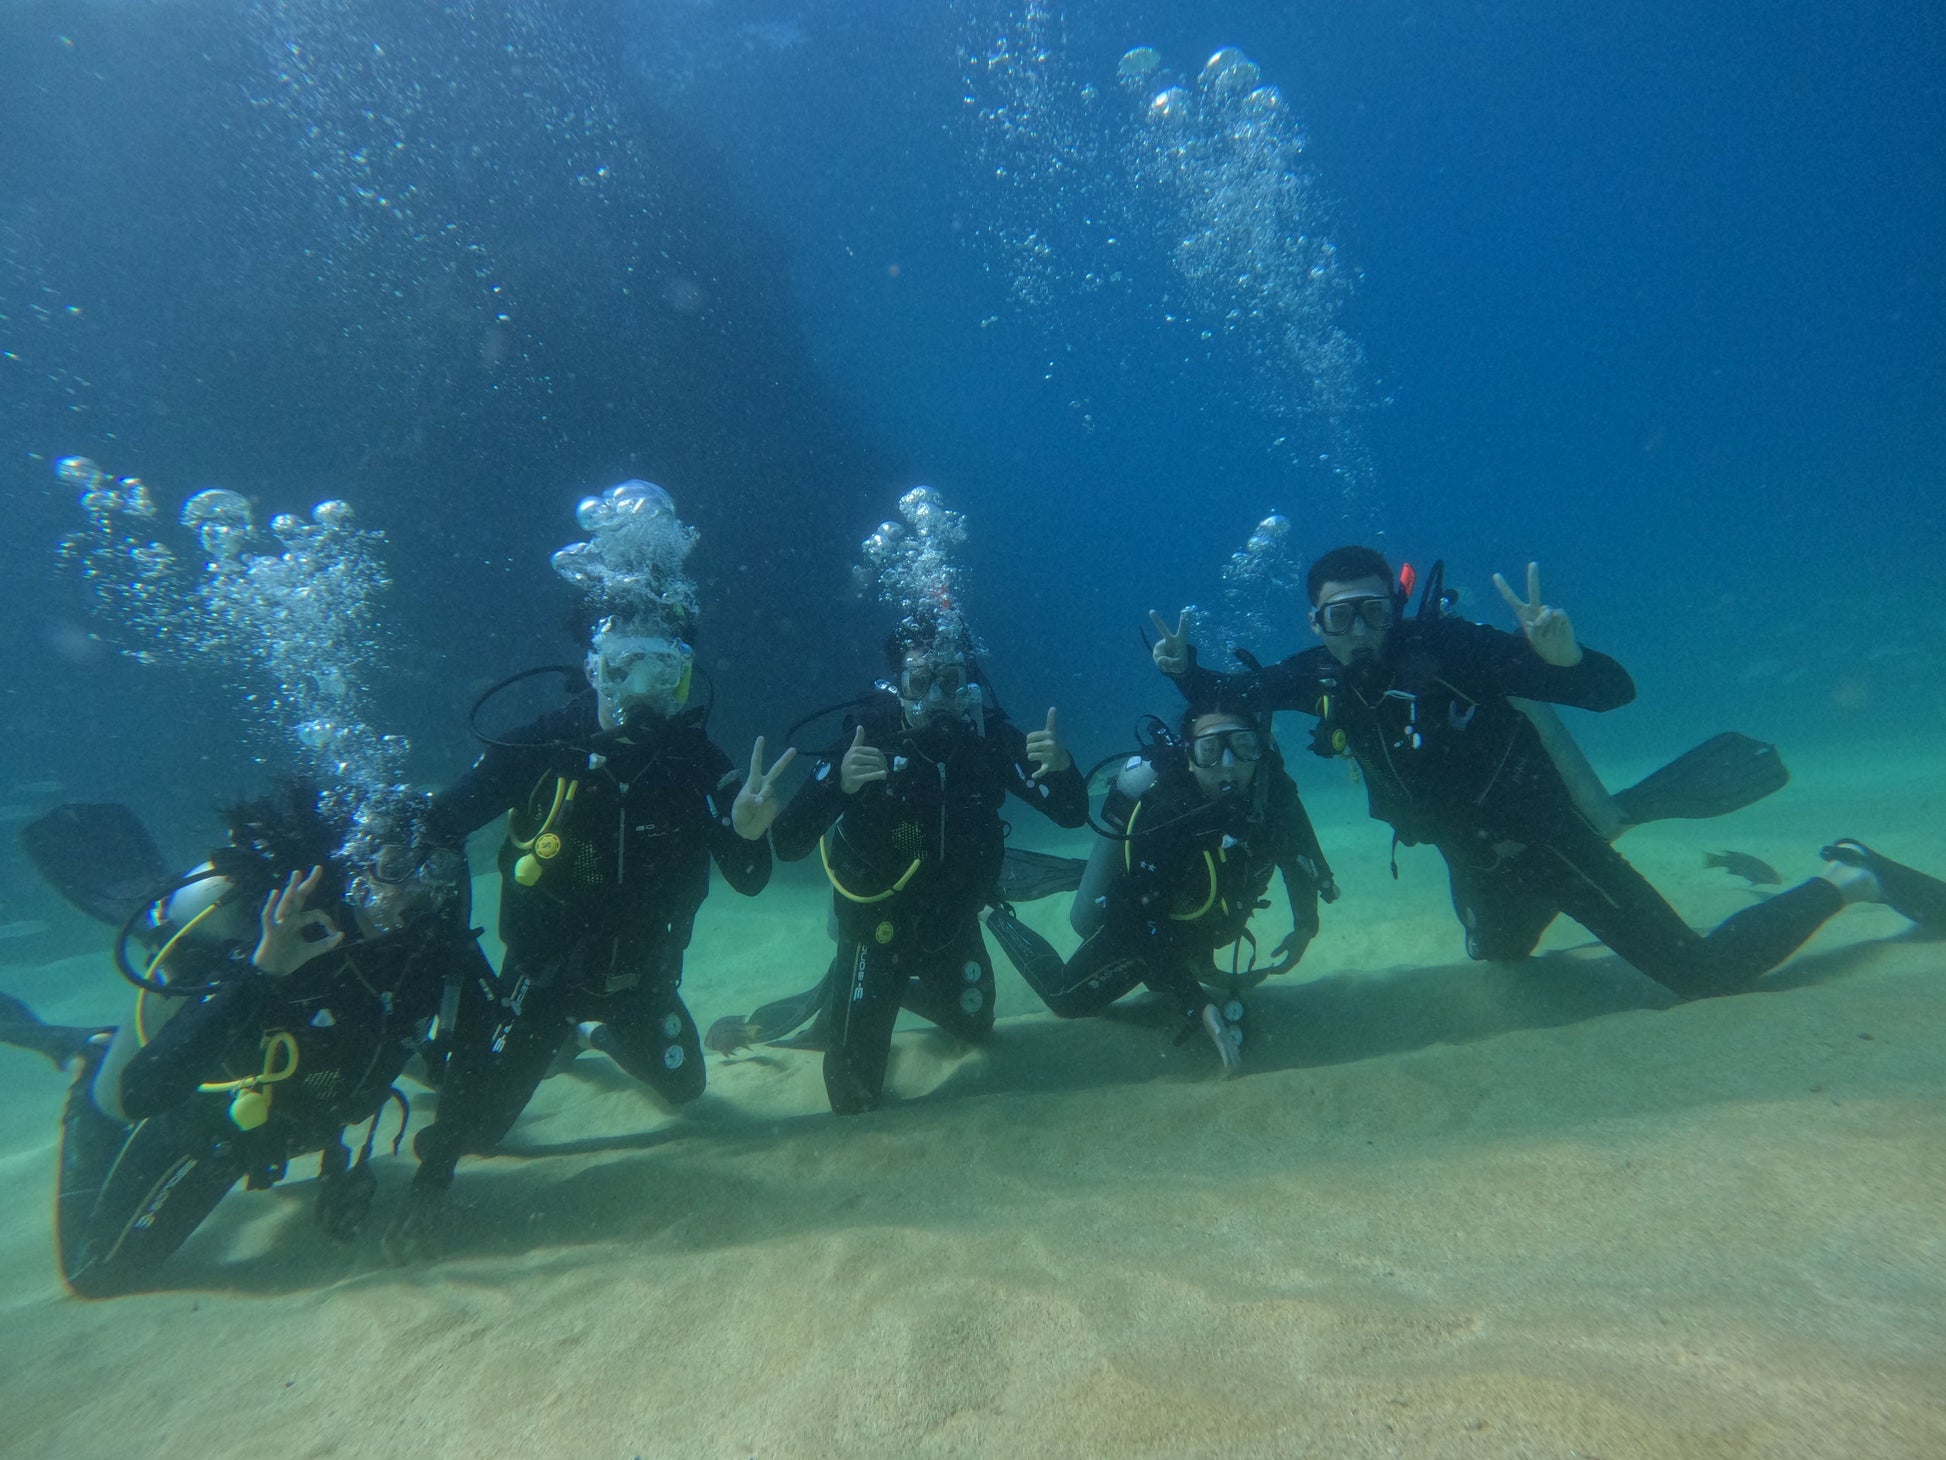 Small group trip participants scuba diving in Los Cabos holding up peace signs underwater.